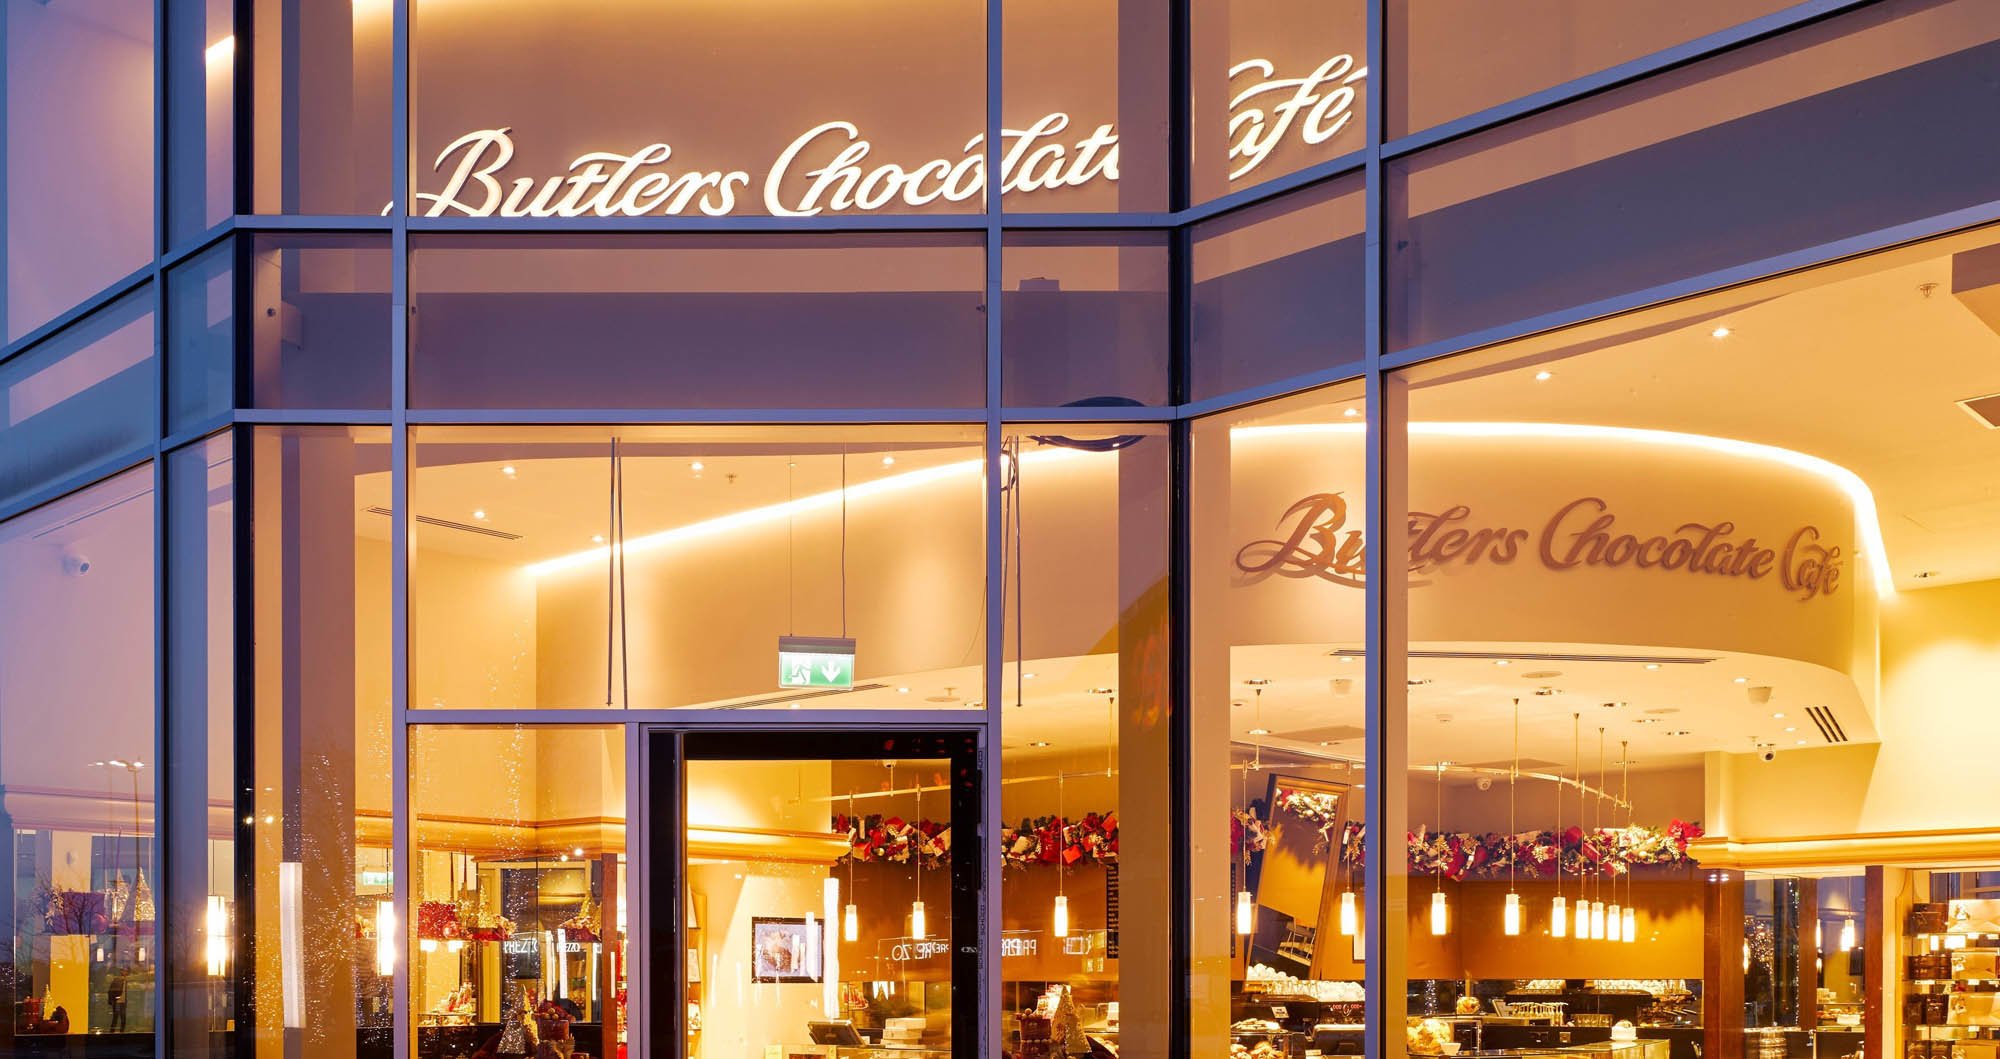 Butlers Chocolates Butlers Chocolate Café, Liffey Valley